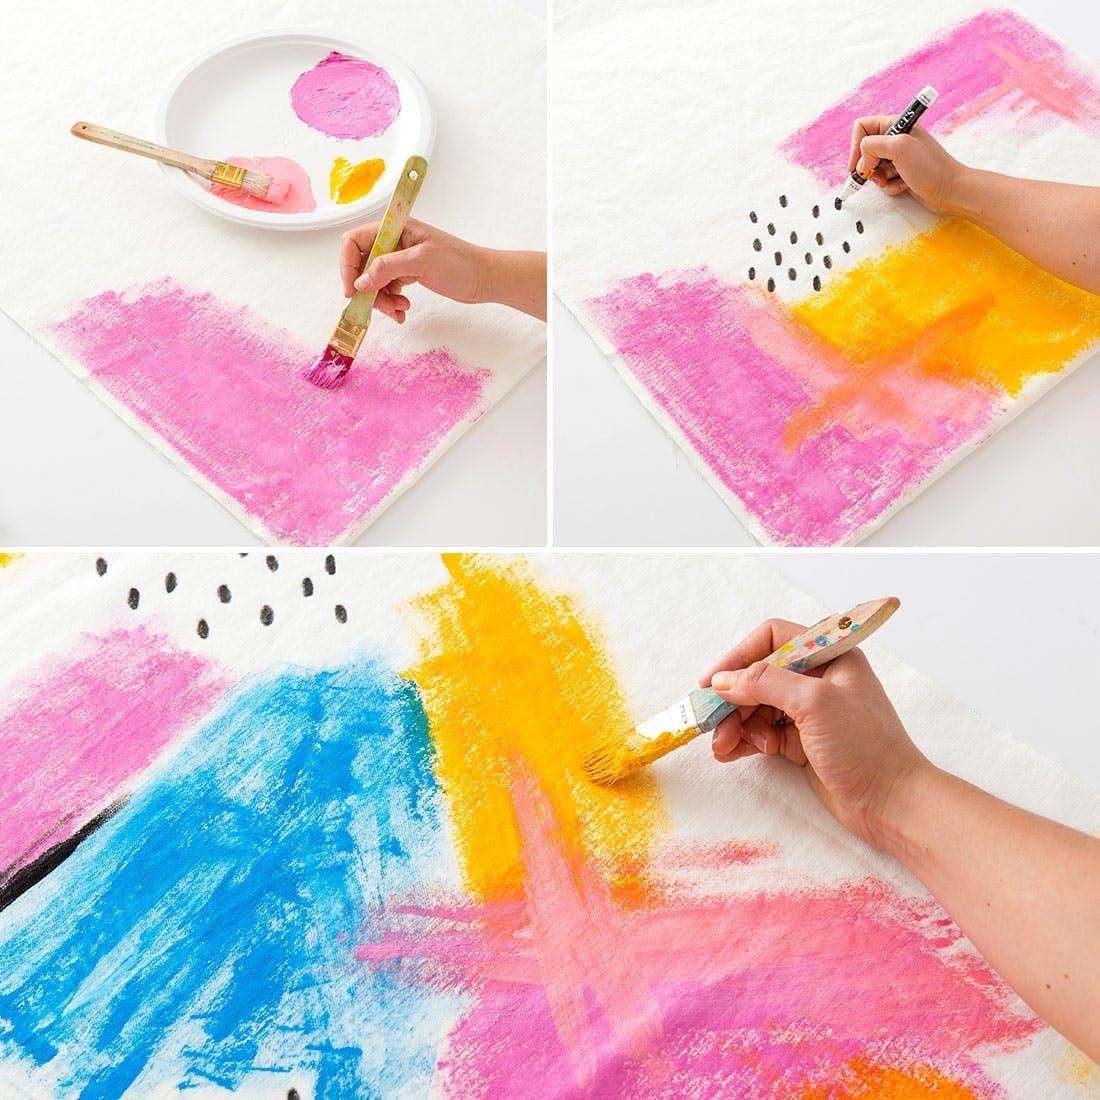 Make Your Own Watercolor Paints - The Merrythought